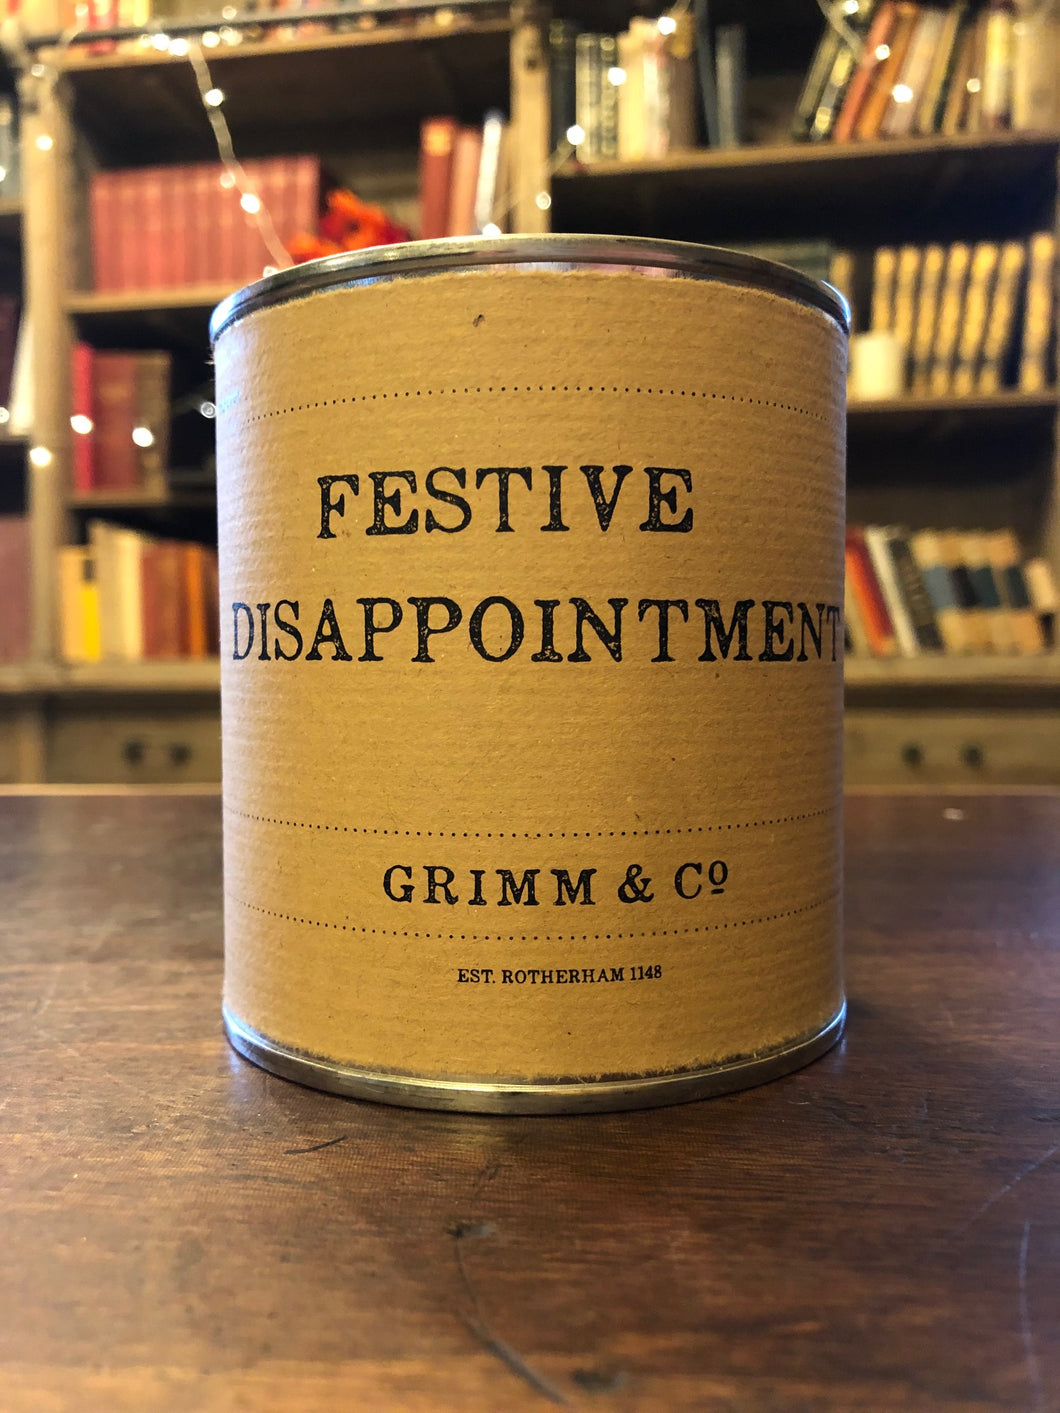 Image shows a tin of Festive Disappointment with kraft paper label